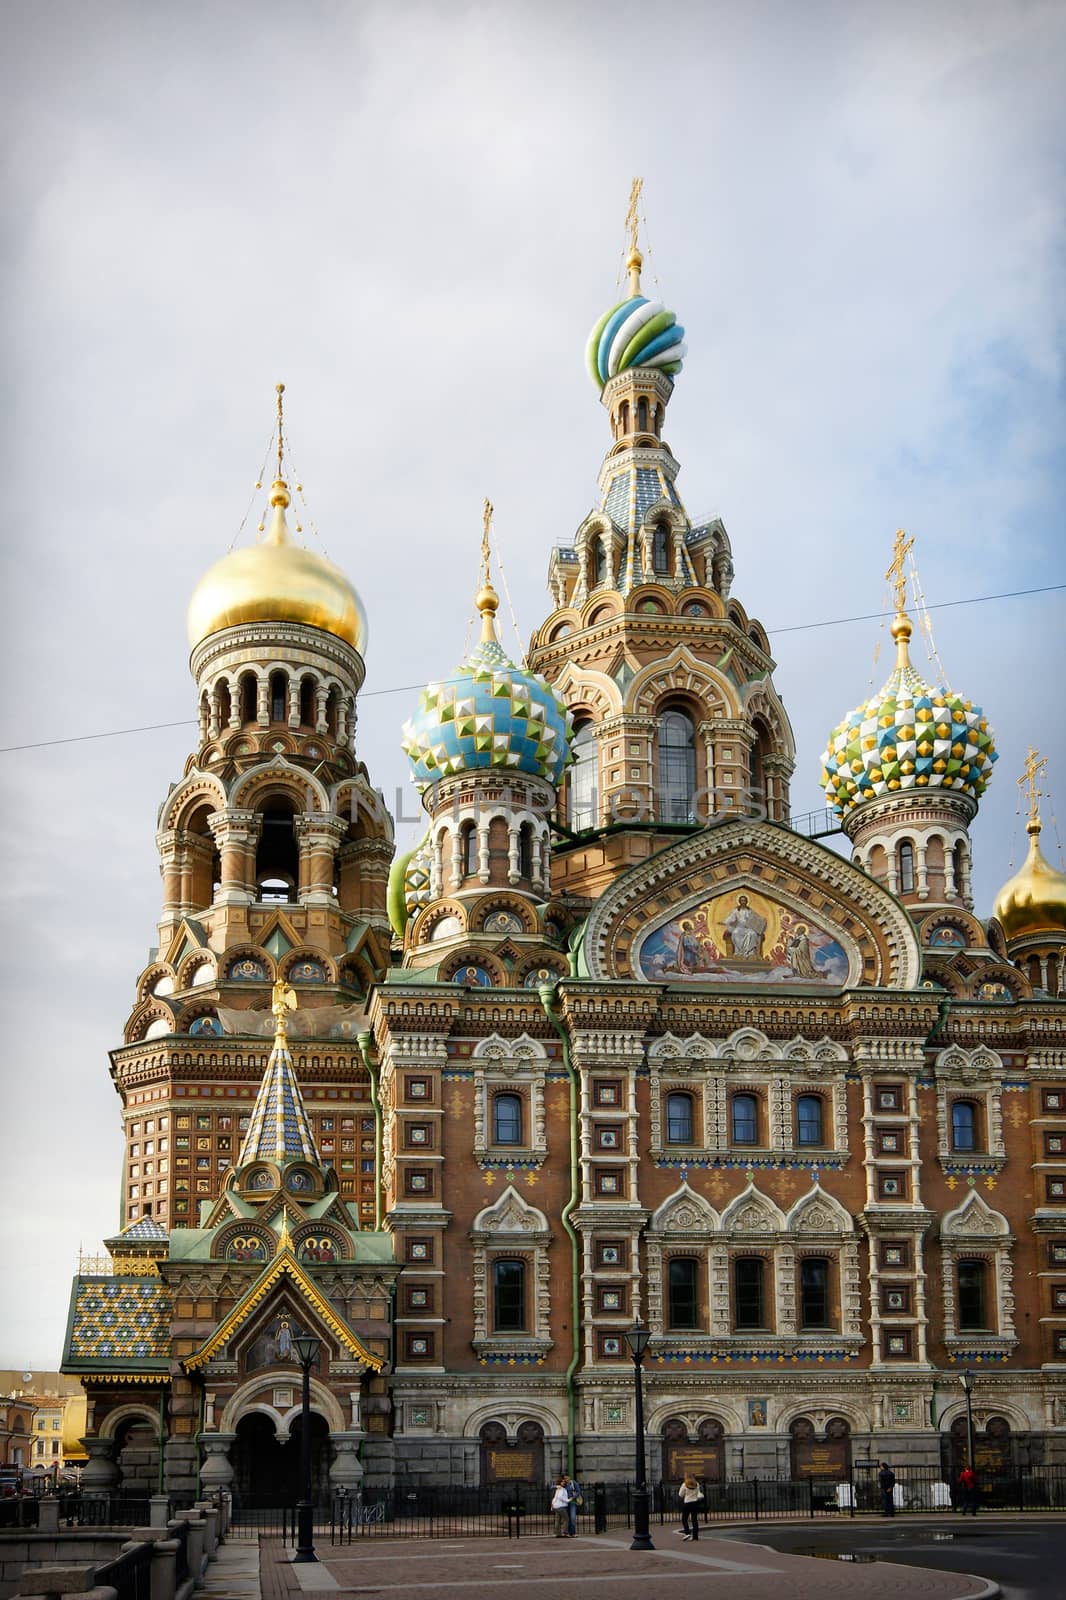 St. Petersburg, Church of the Savior on spilled blood